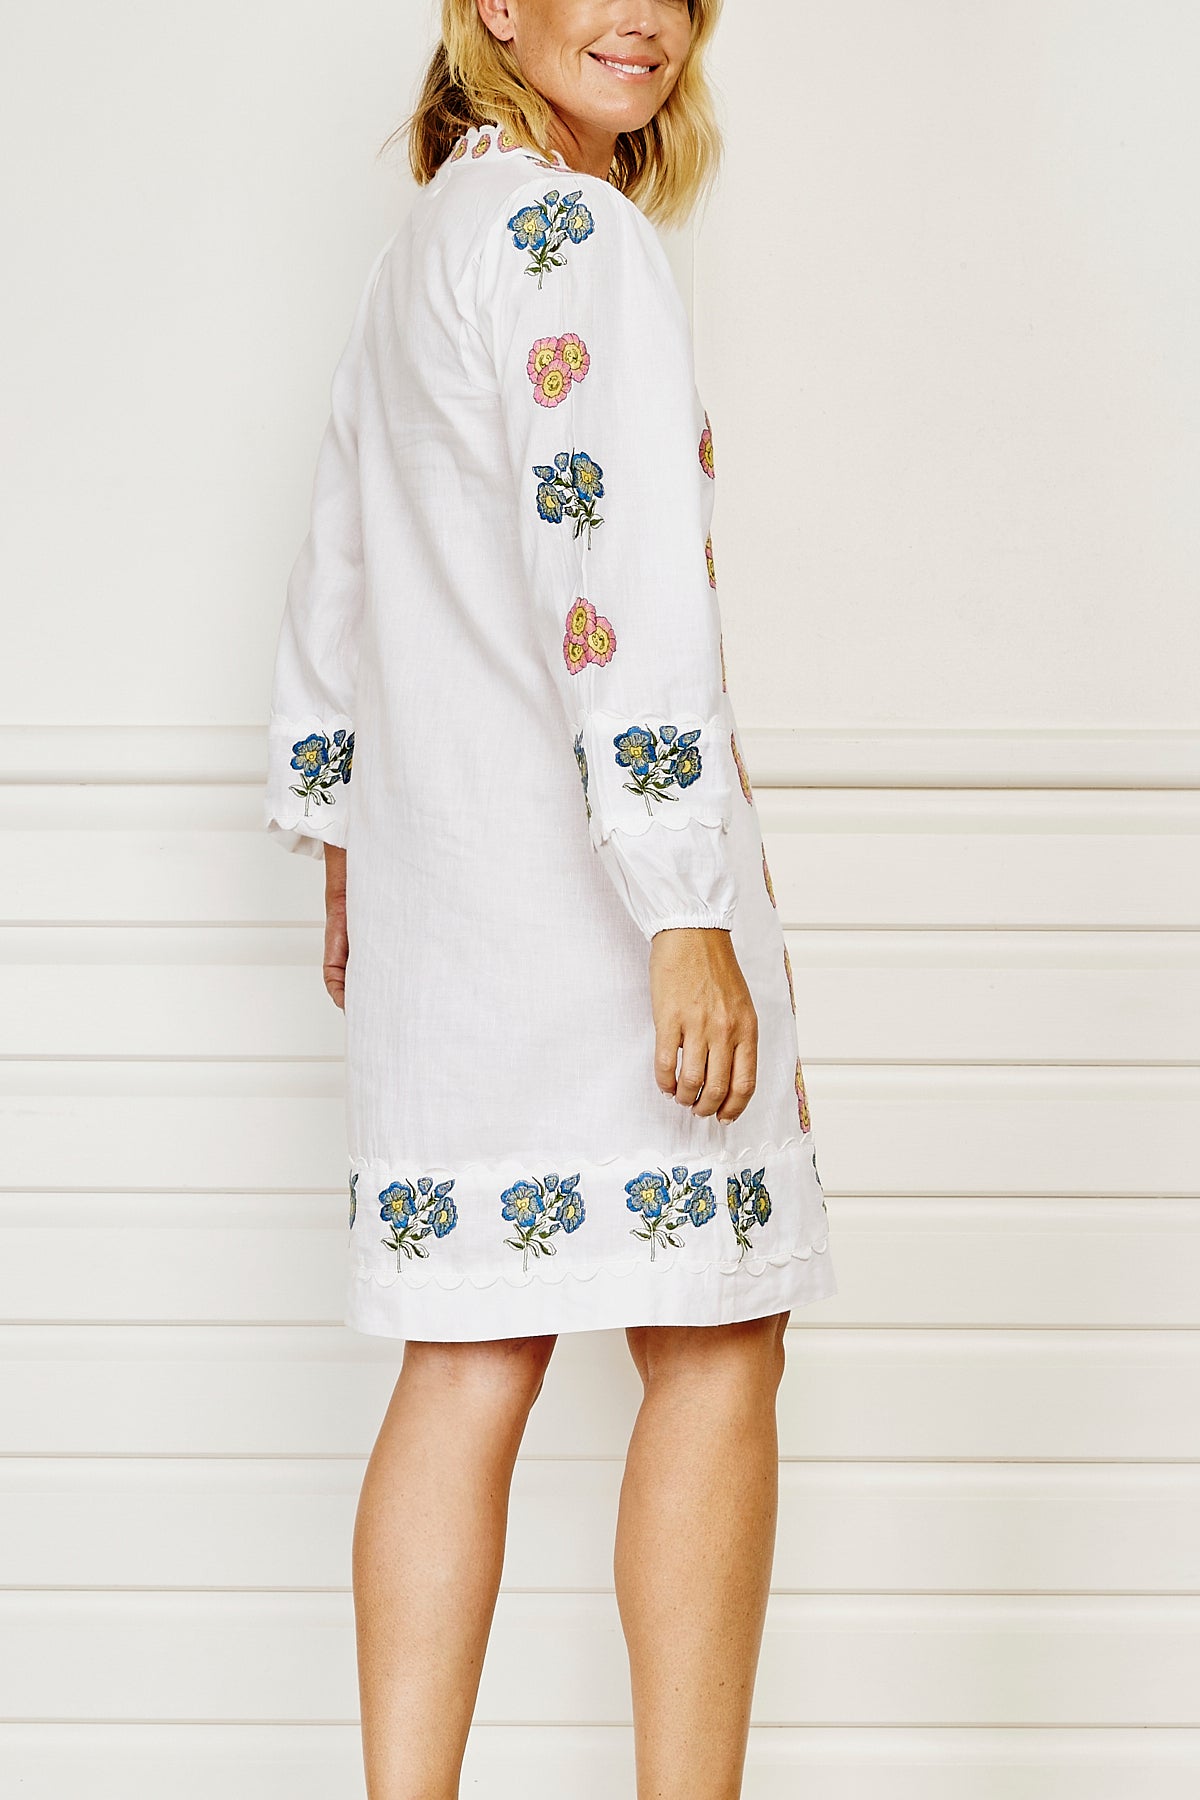 Bahamas Shift Dress - White with Floral Embroidery